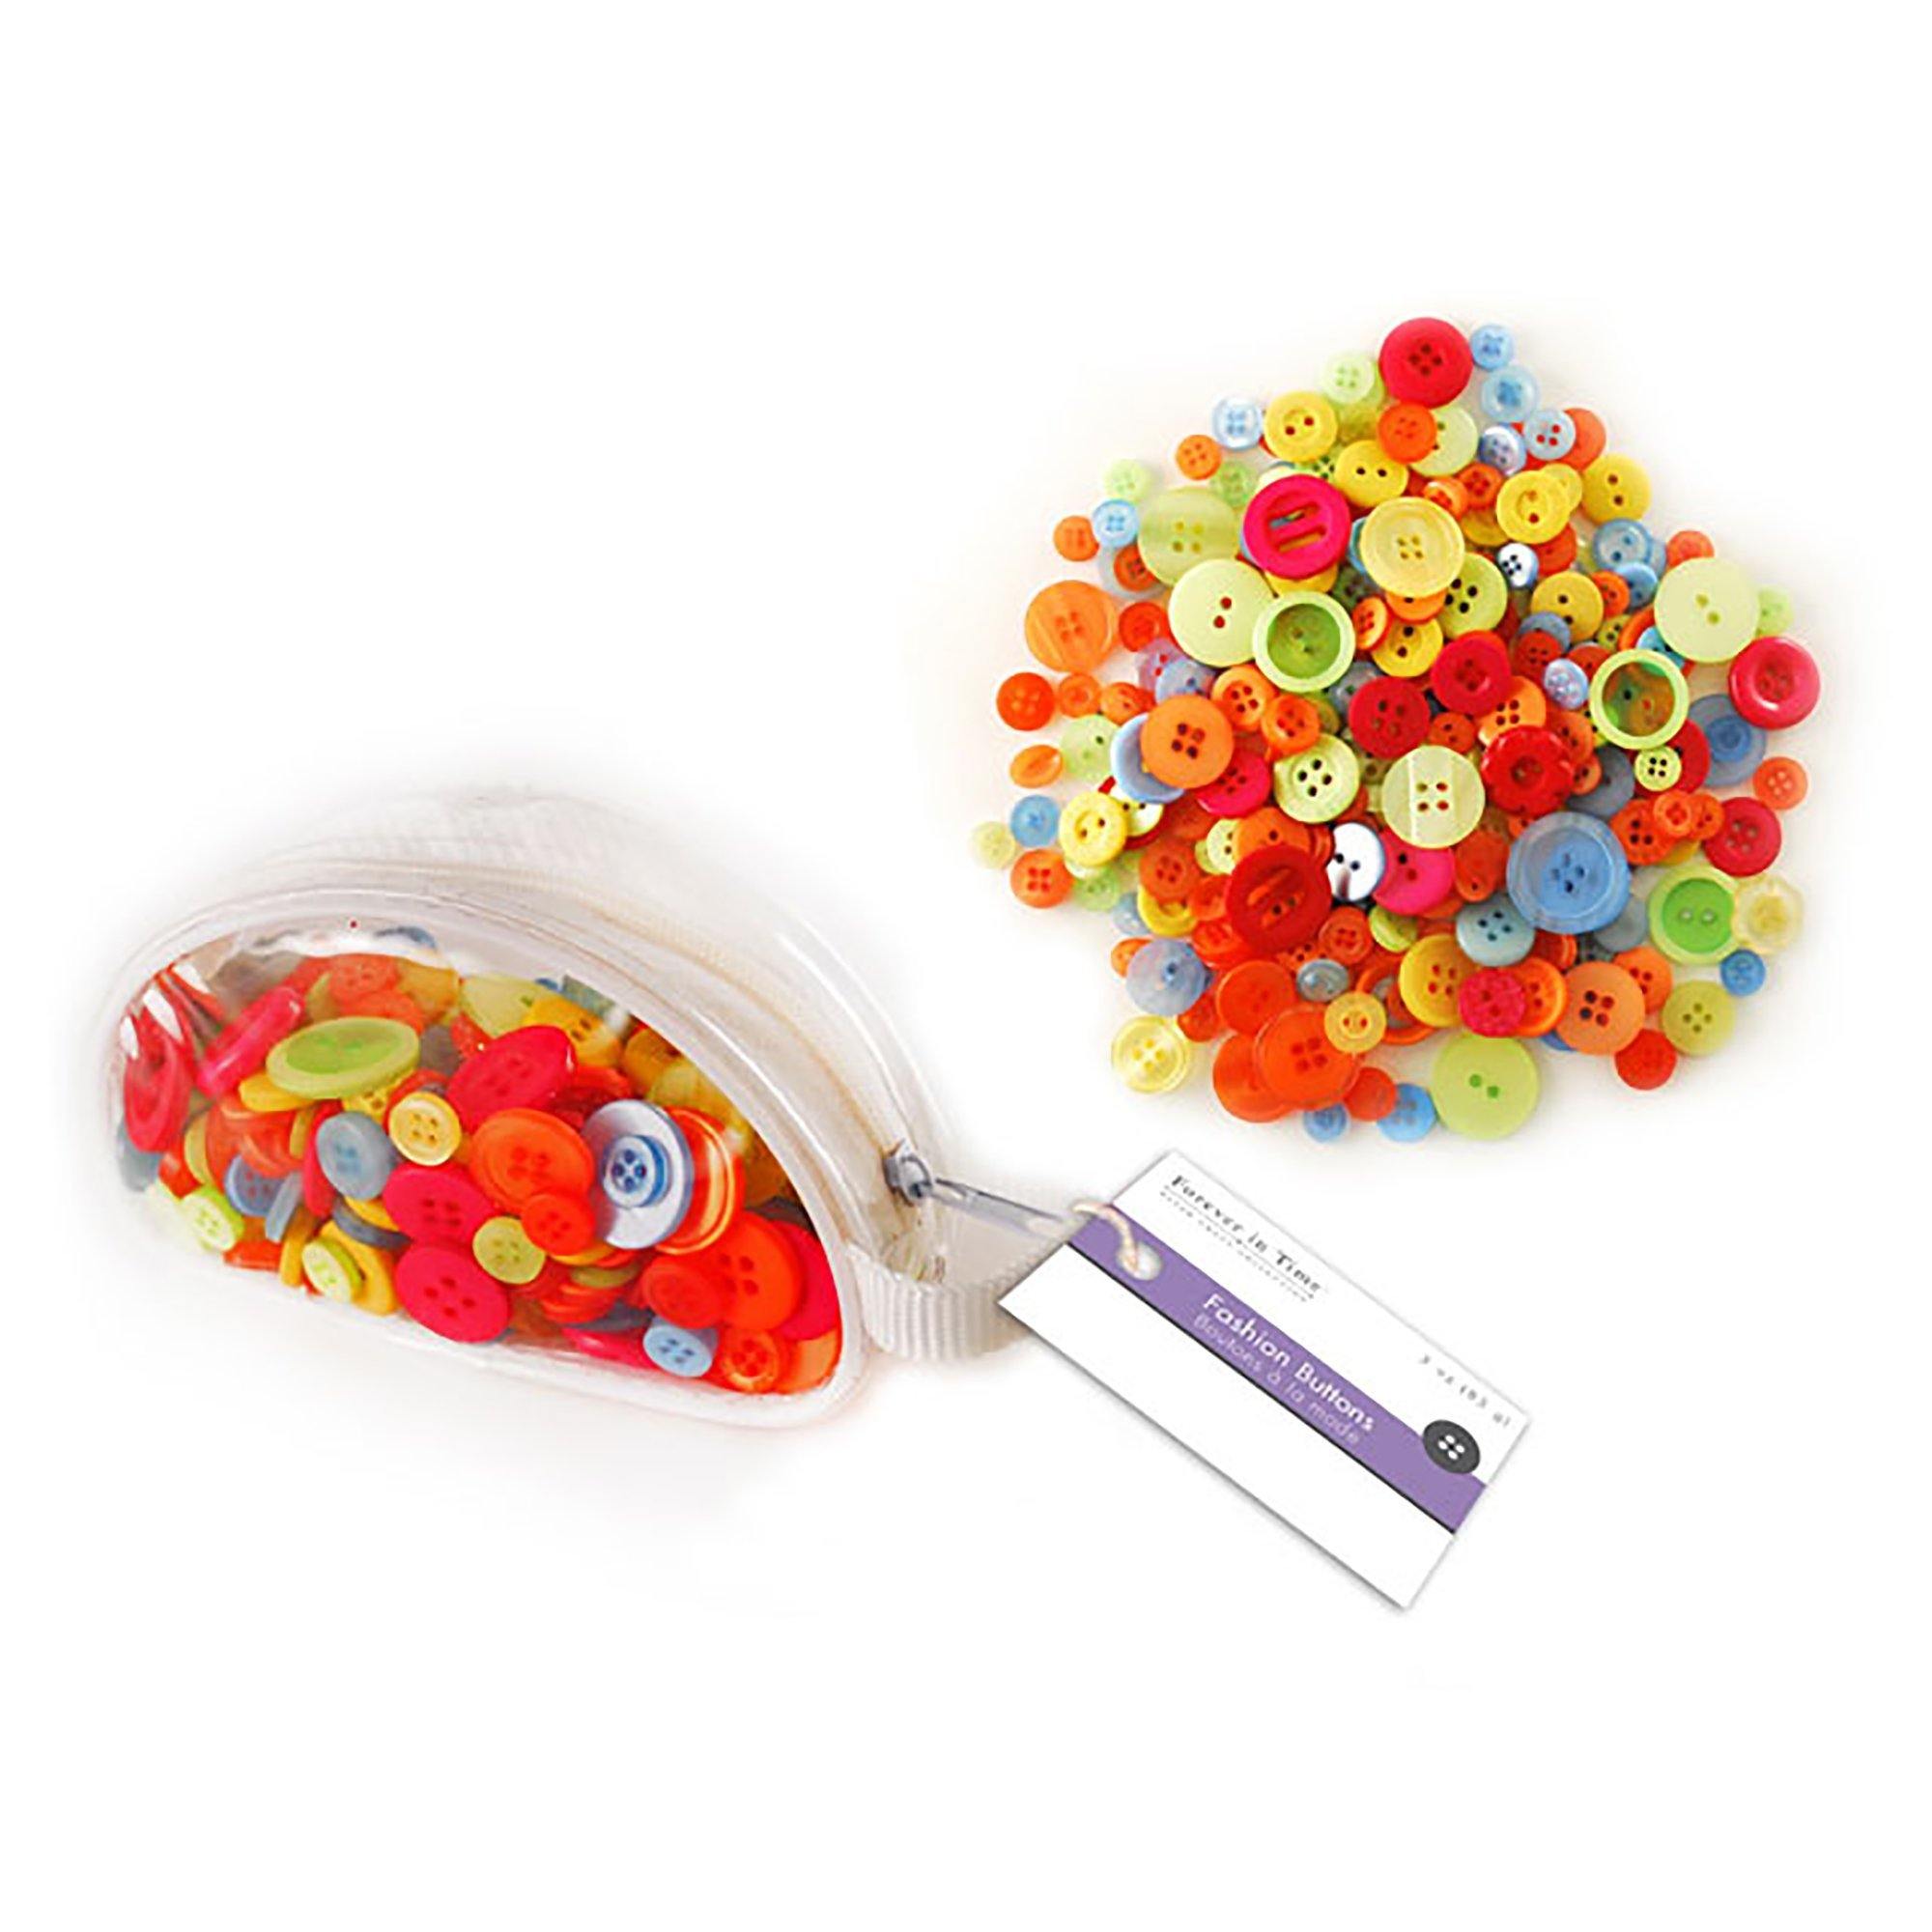 Tropical Button Embellishment: 85G Fashion Dyed Buttons In Purse - Dollar Max Dépôt